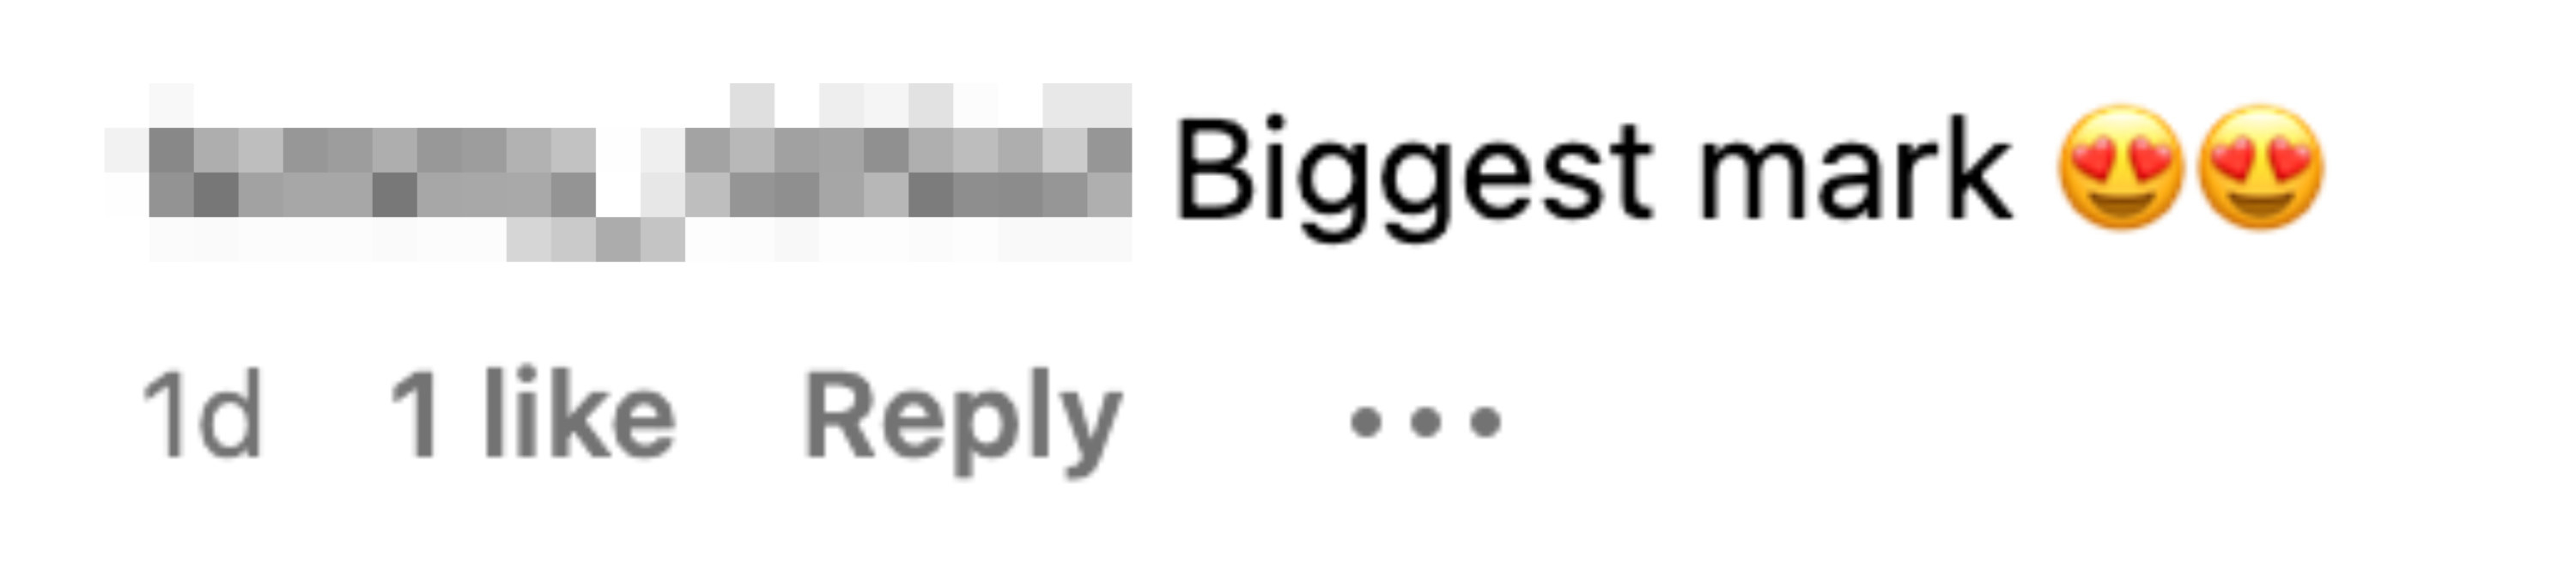 &quot;Biggest mark&quot; with two heart-eye emojis